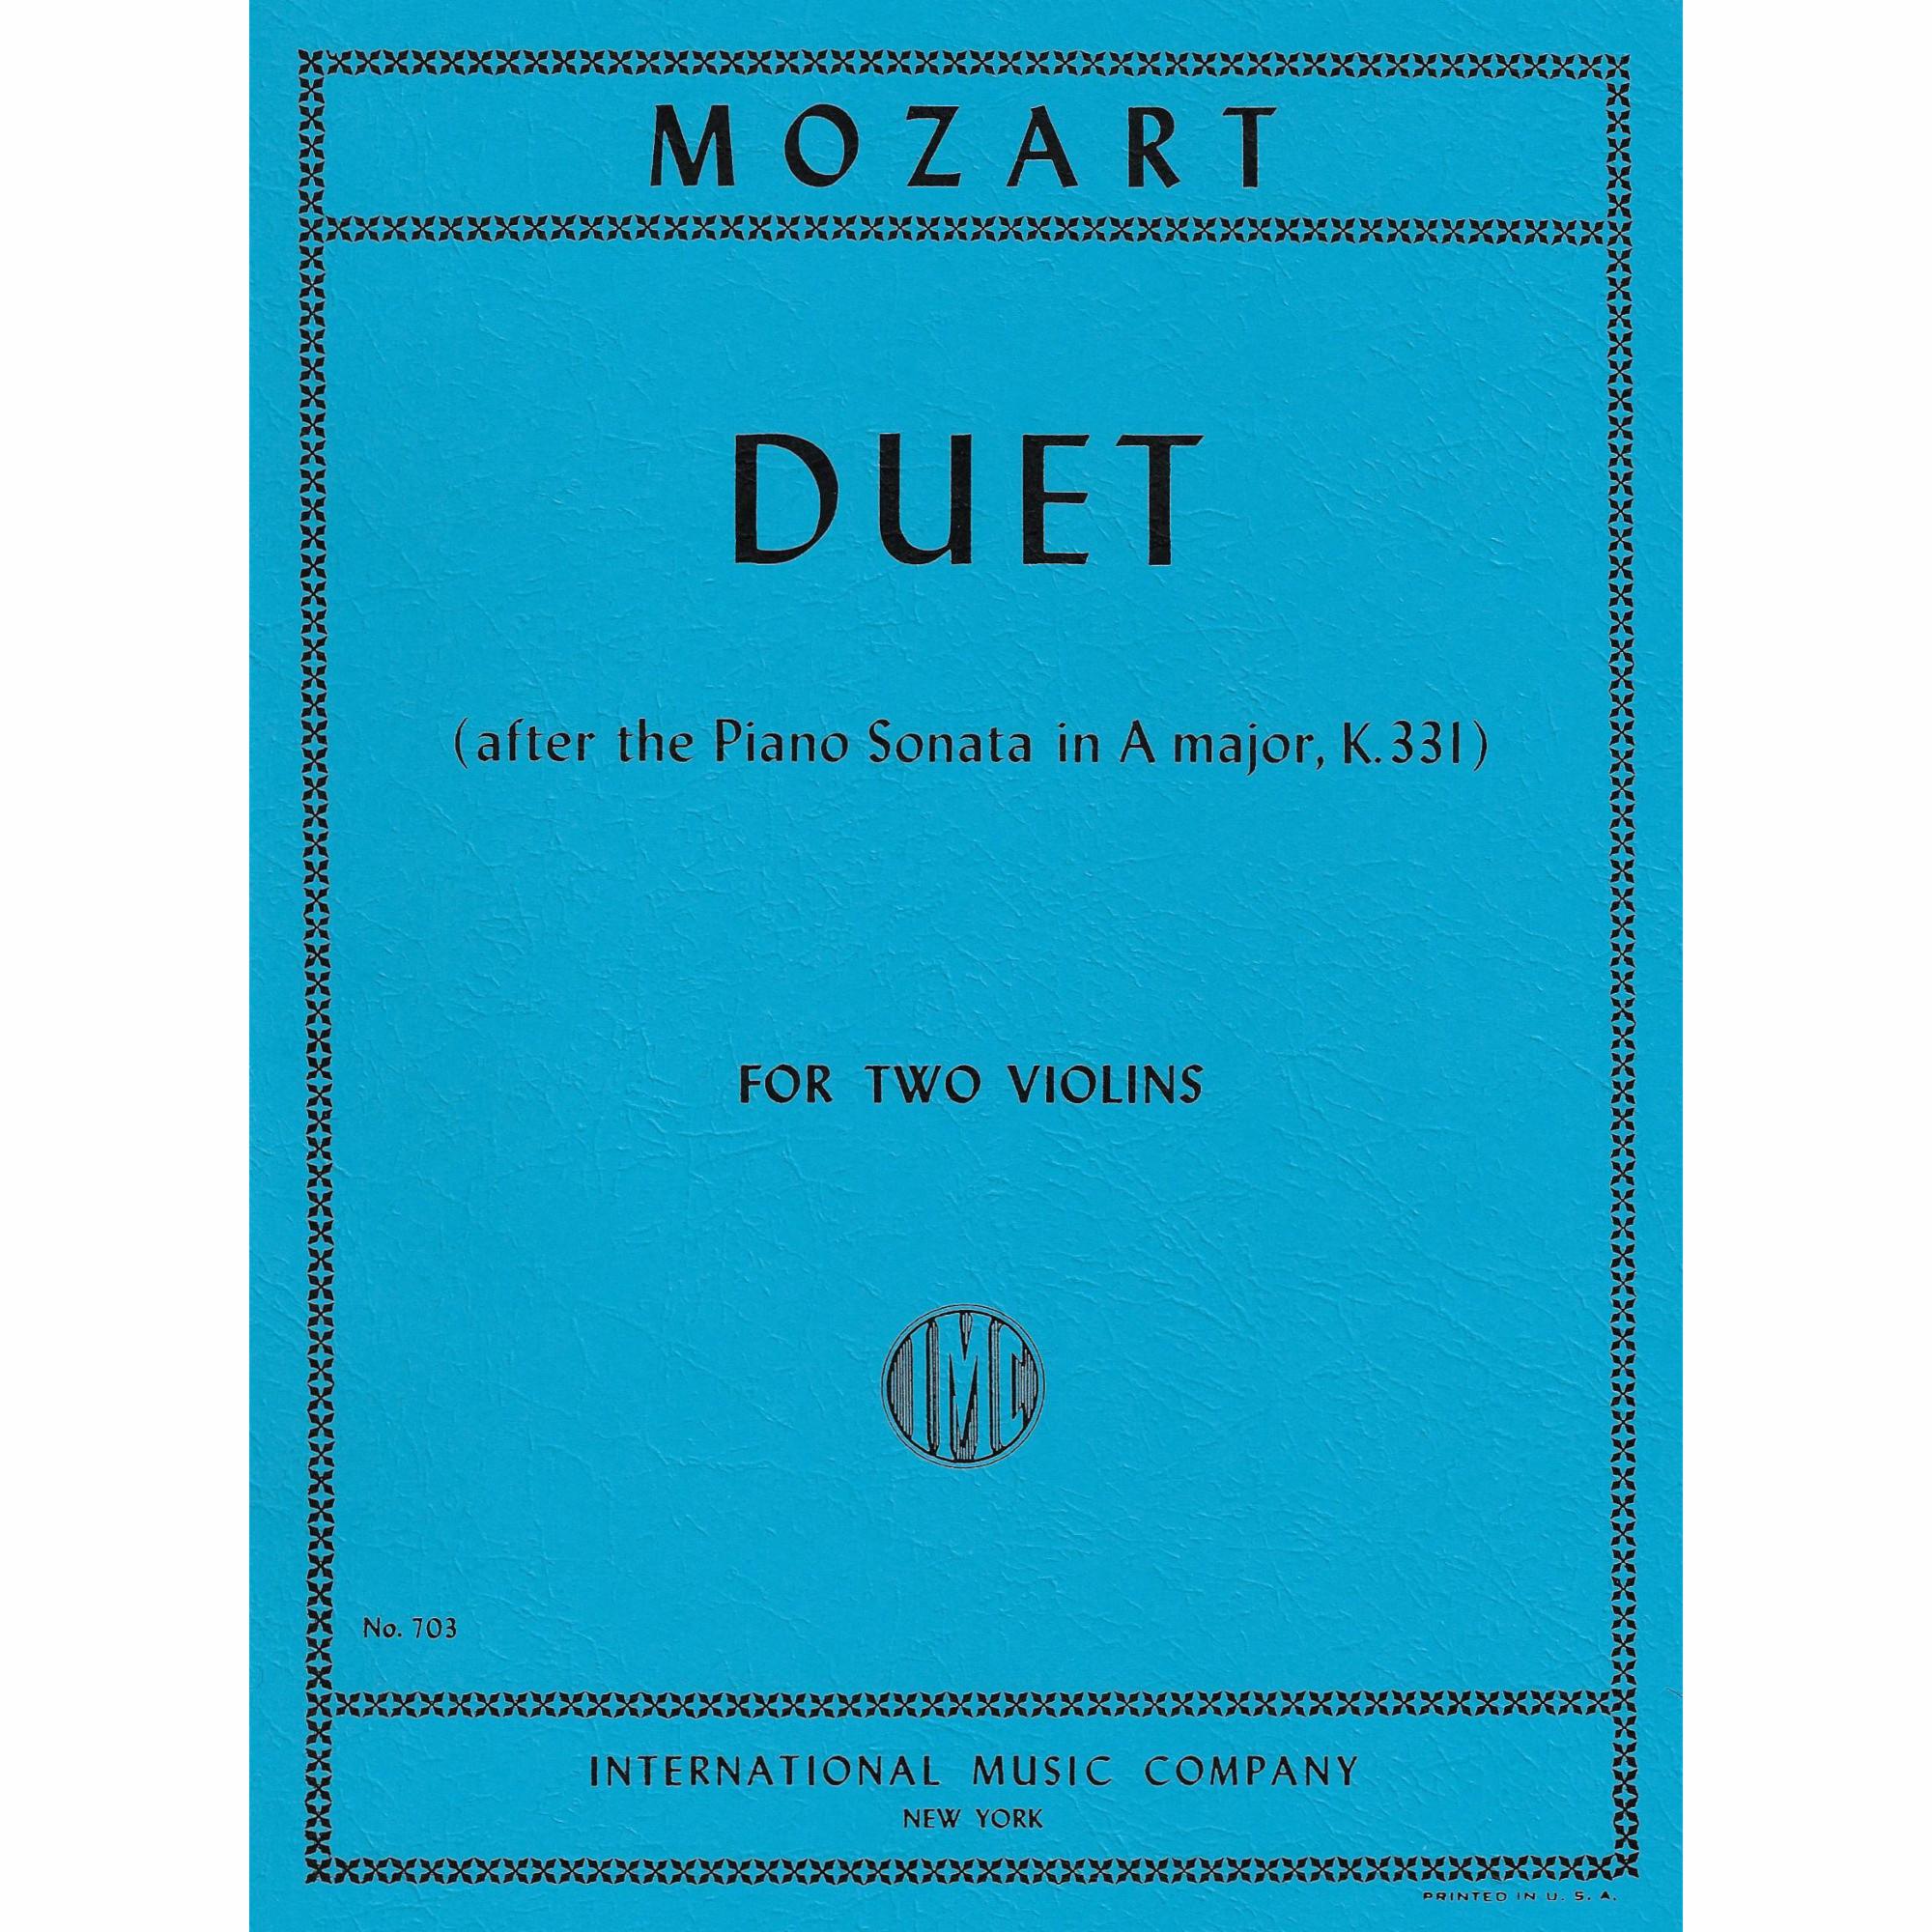 Mozart -- Duet, after the Piano Sonata in A Major, K. 331 for Two Violins